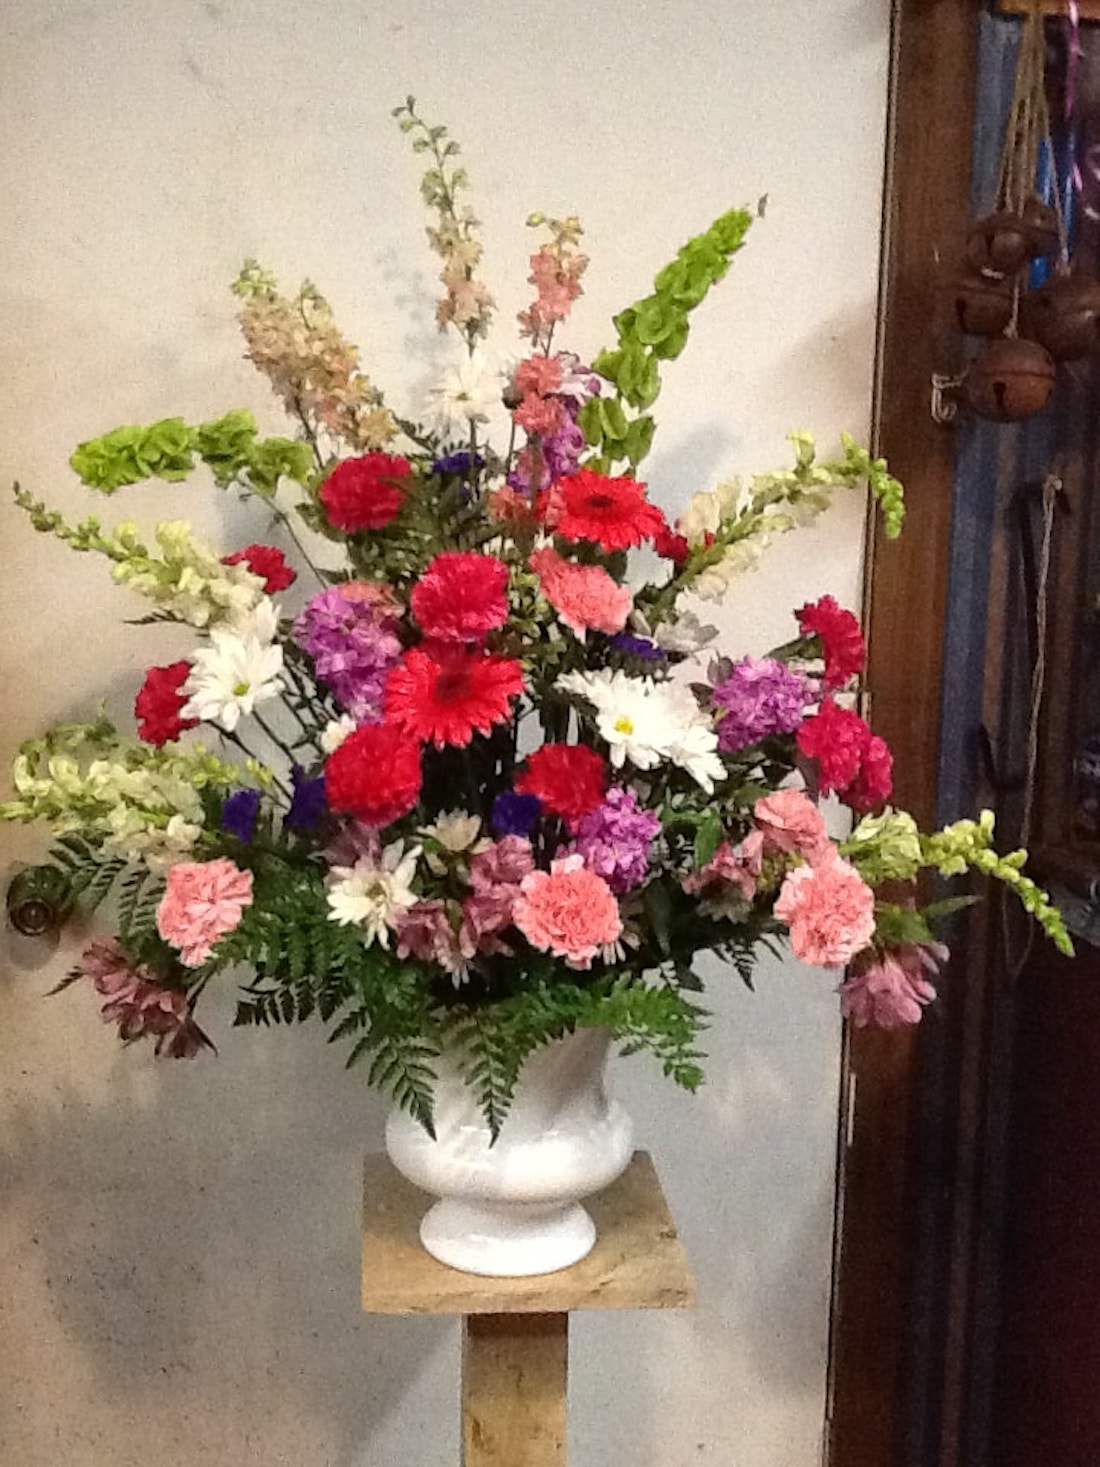 Carnations Alstroemeria Gerbera Daisy Snap Dragons Poms and Larkspur in an Urn